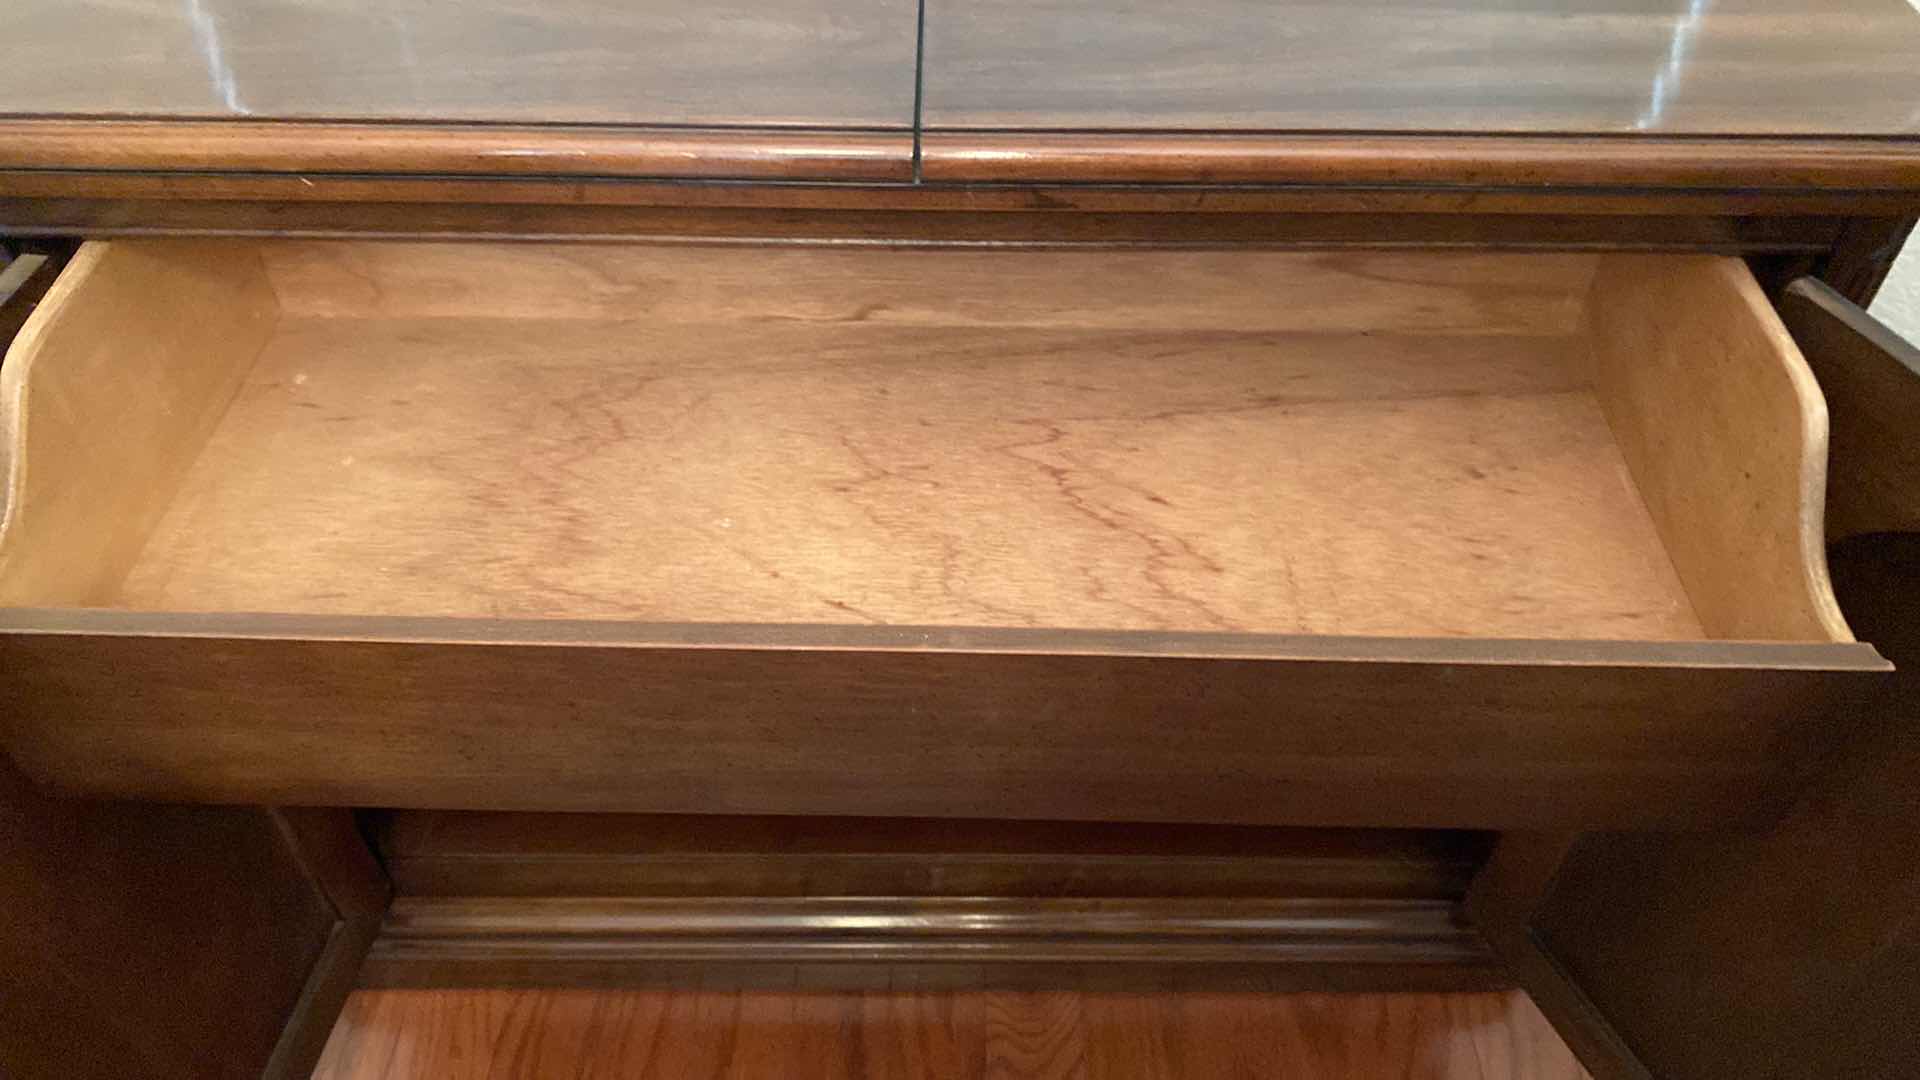 Photo 4 of WOOD BUFFET 39“ x 18“ H 30 1/2” TOP OPENS ( NEEDS NEW HINGES)